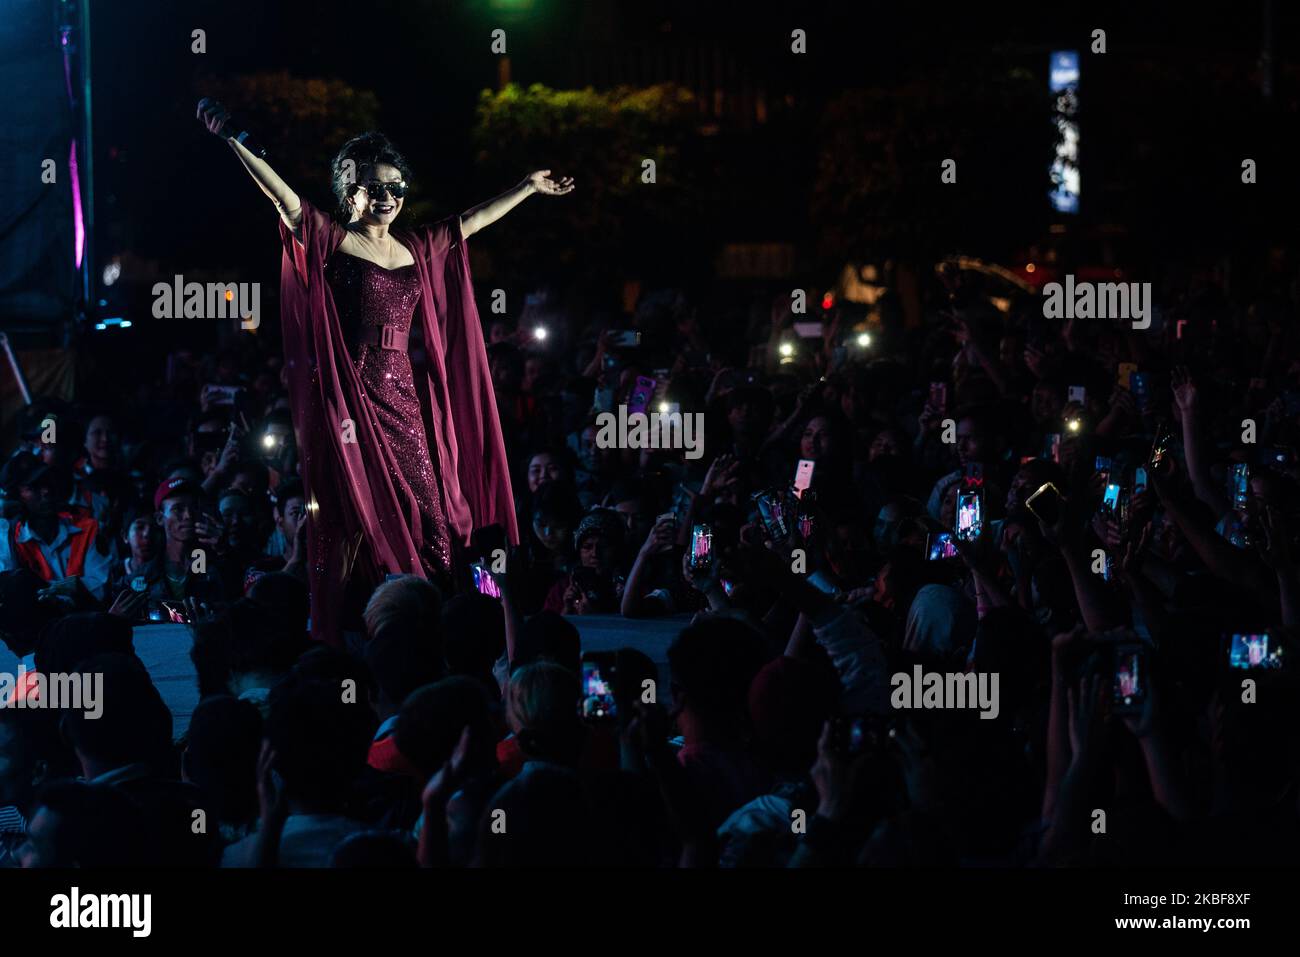 A singer performs on stage during the ”&Proud' LGBT festival in Yangon, Myanmar on 24 January, 2020. (Photo by Shwe Paw Mya Tin/NurPhoto) Stock Photo